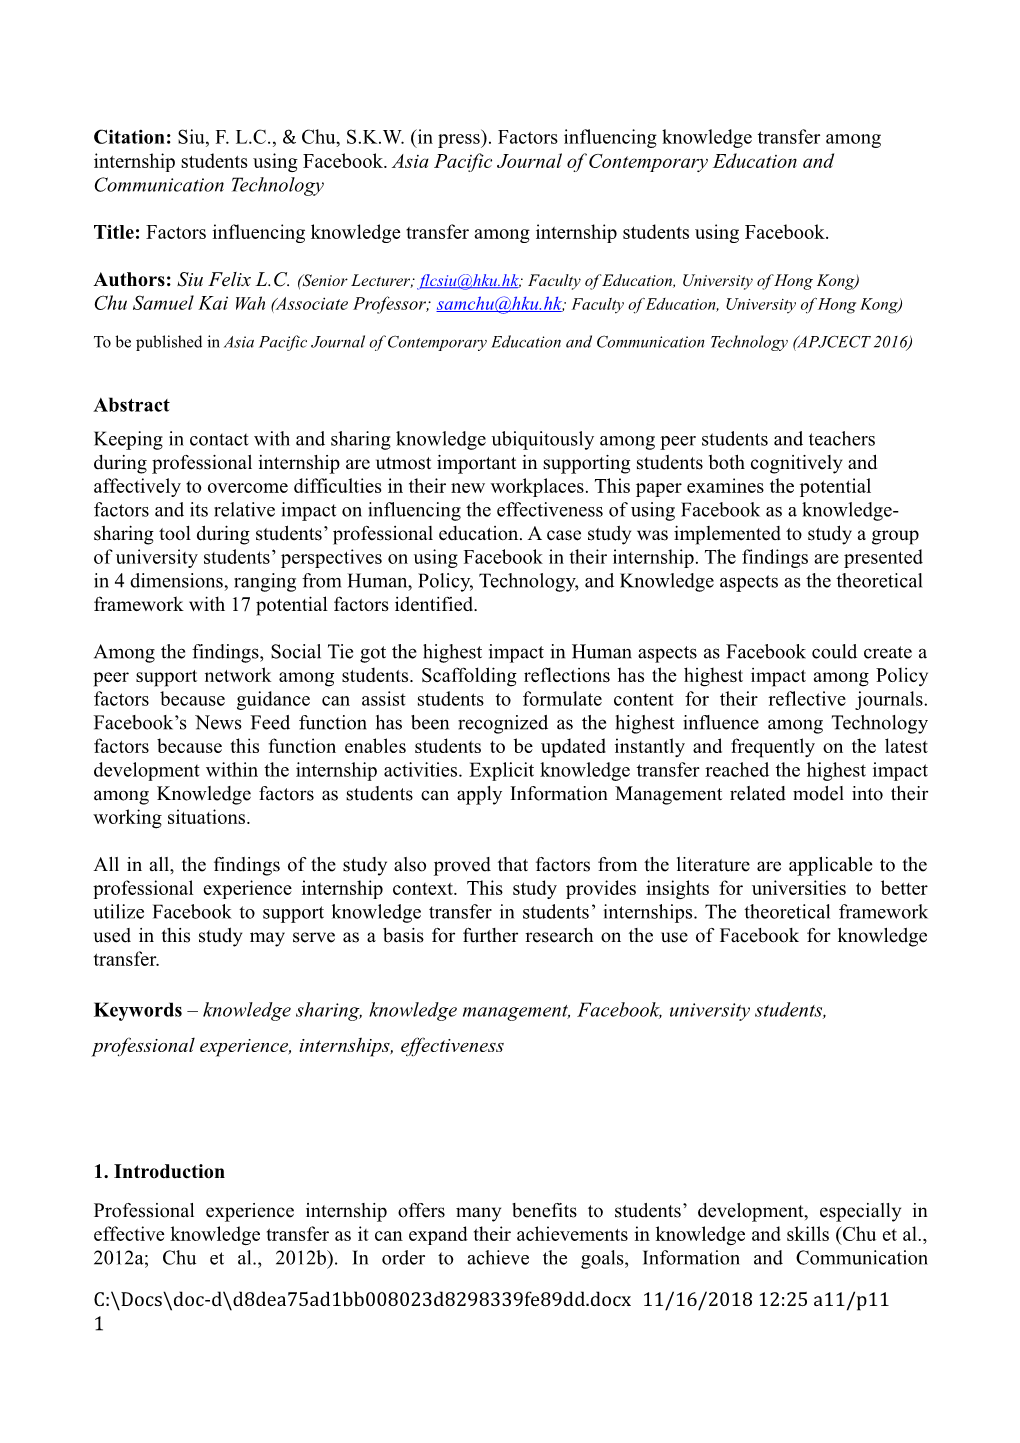 Title: Factors Influencing Knowledge Transfer Among Internship Students Using Facebook